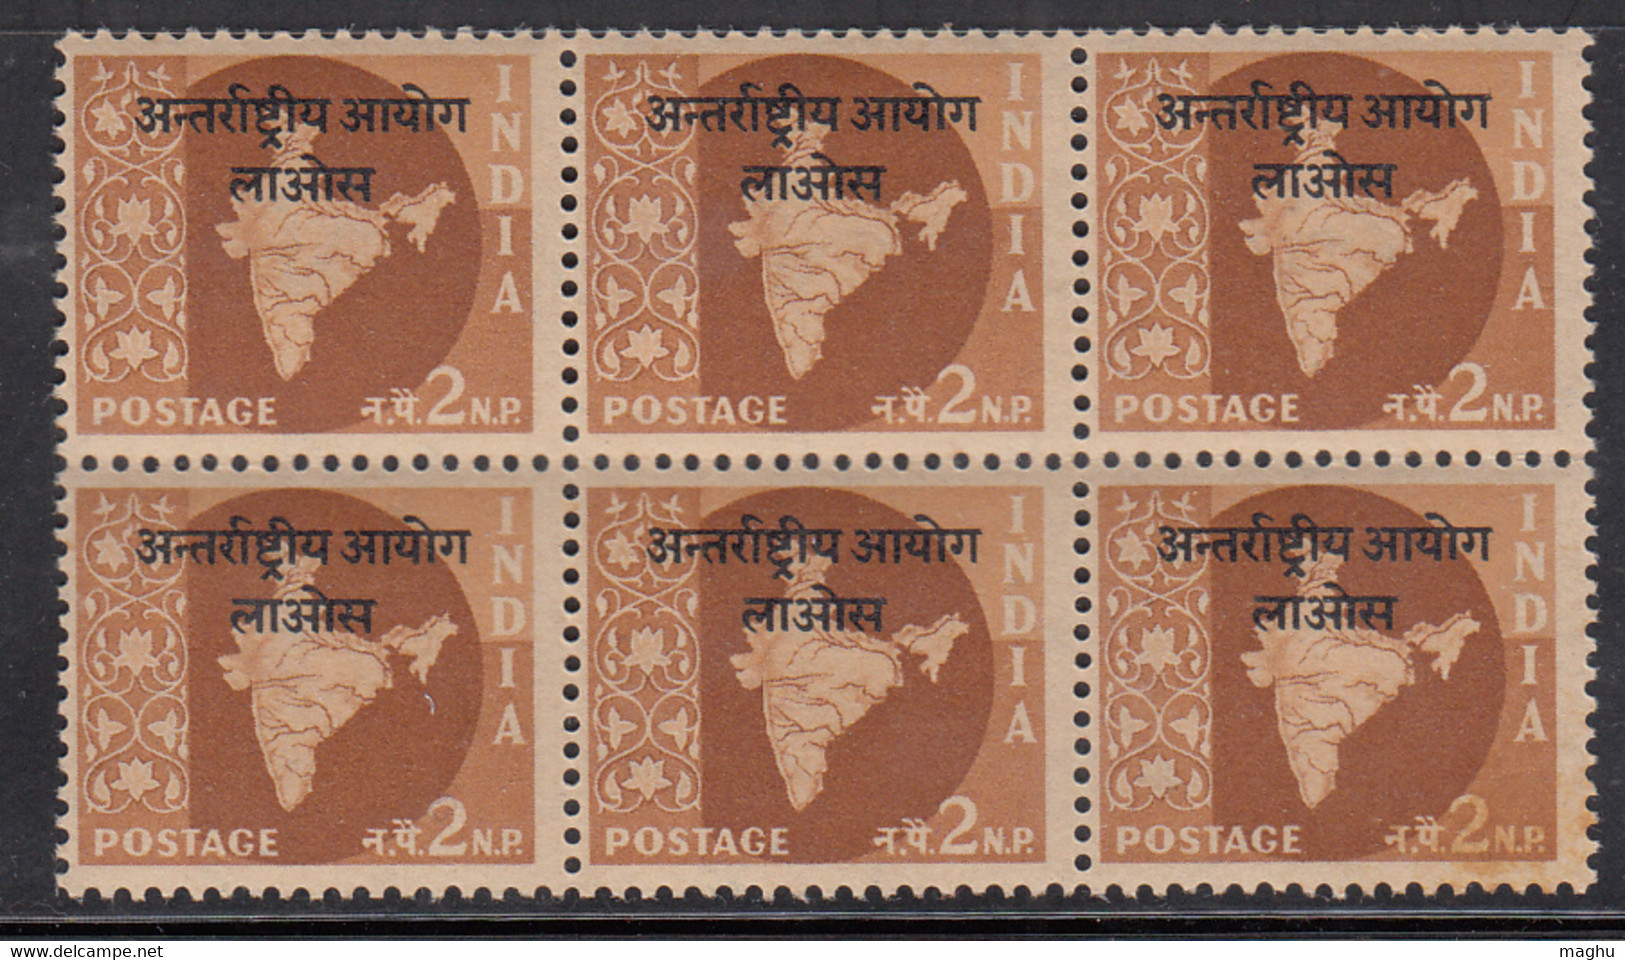 Star Watermark Series, 2np Block Of 6 Laos Opt. On  Map, India MNH 1957 - Military Service Stamp